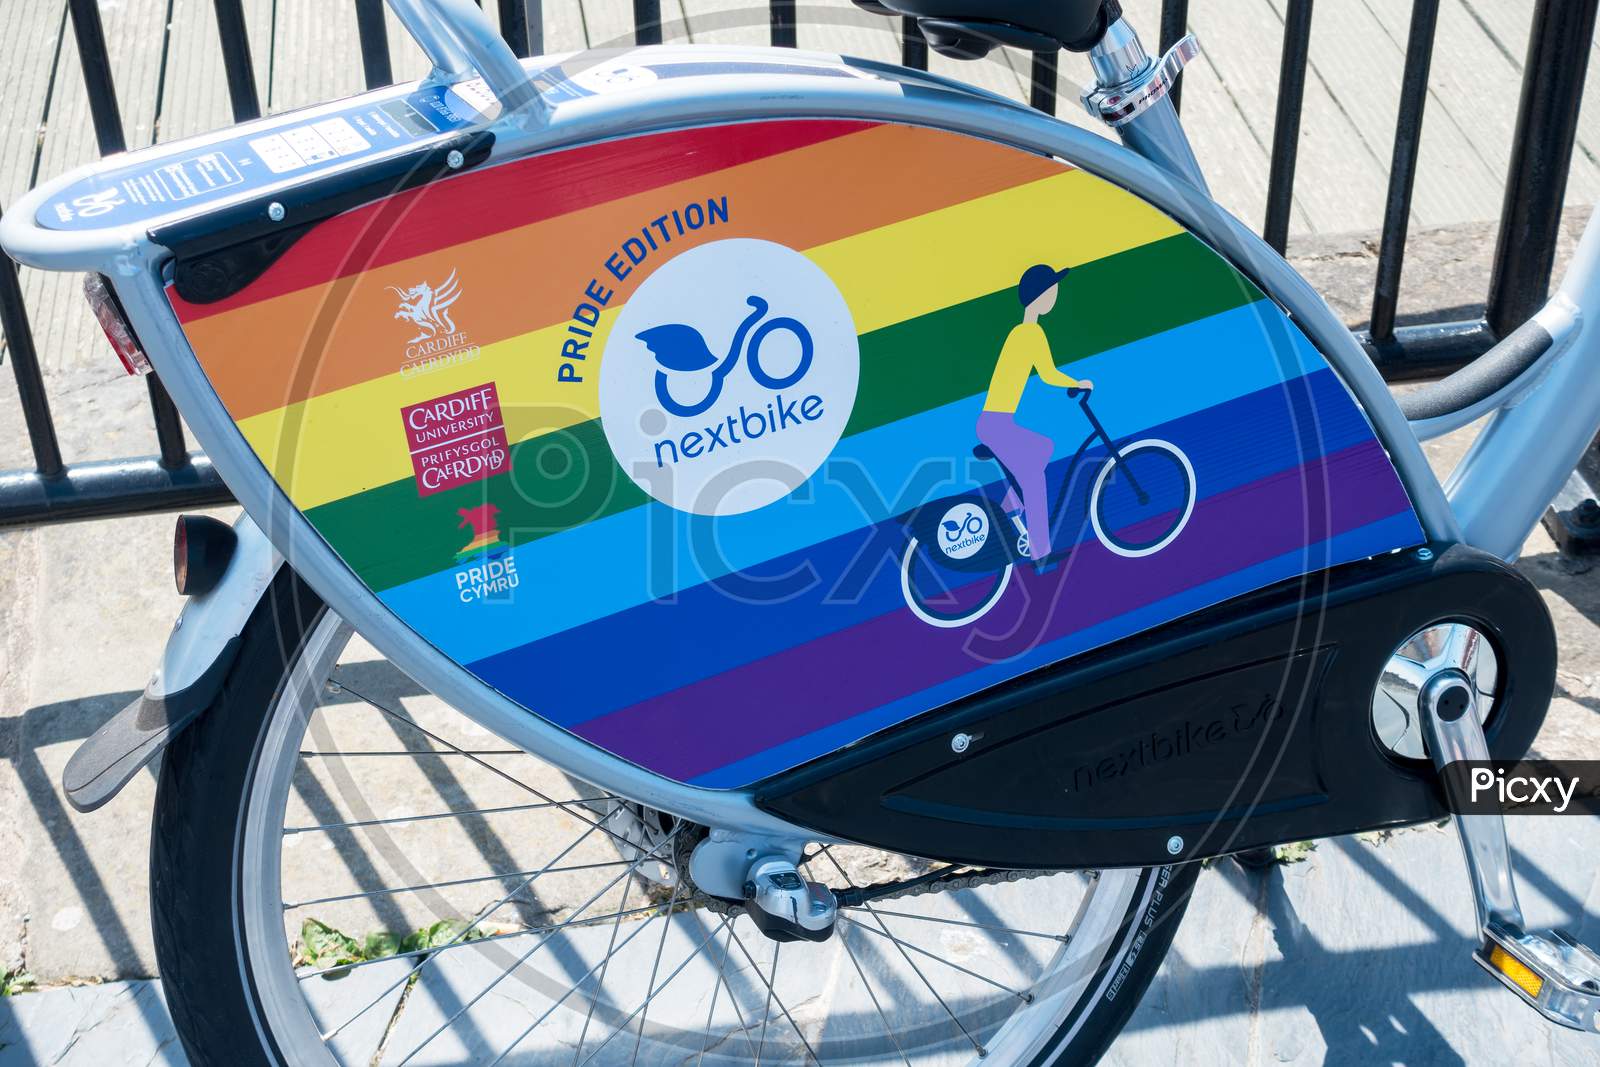 Cardiff/Uk - July 7 : Pride Edition Cycle For Hire In Cardiff On July 7, 2019